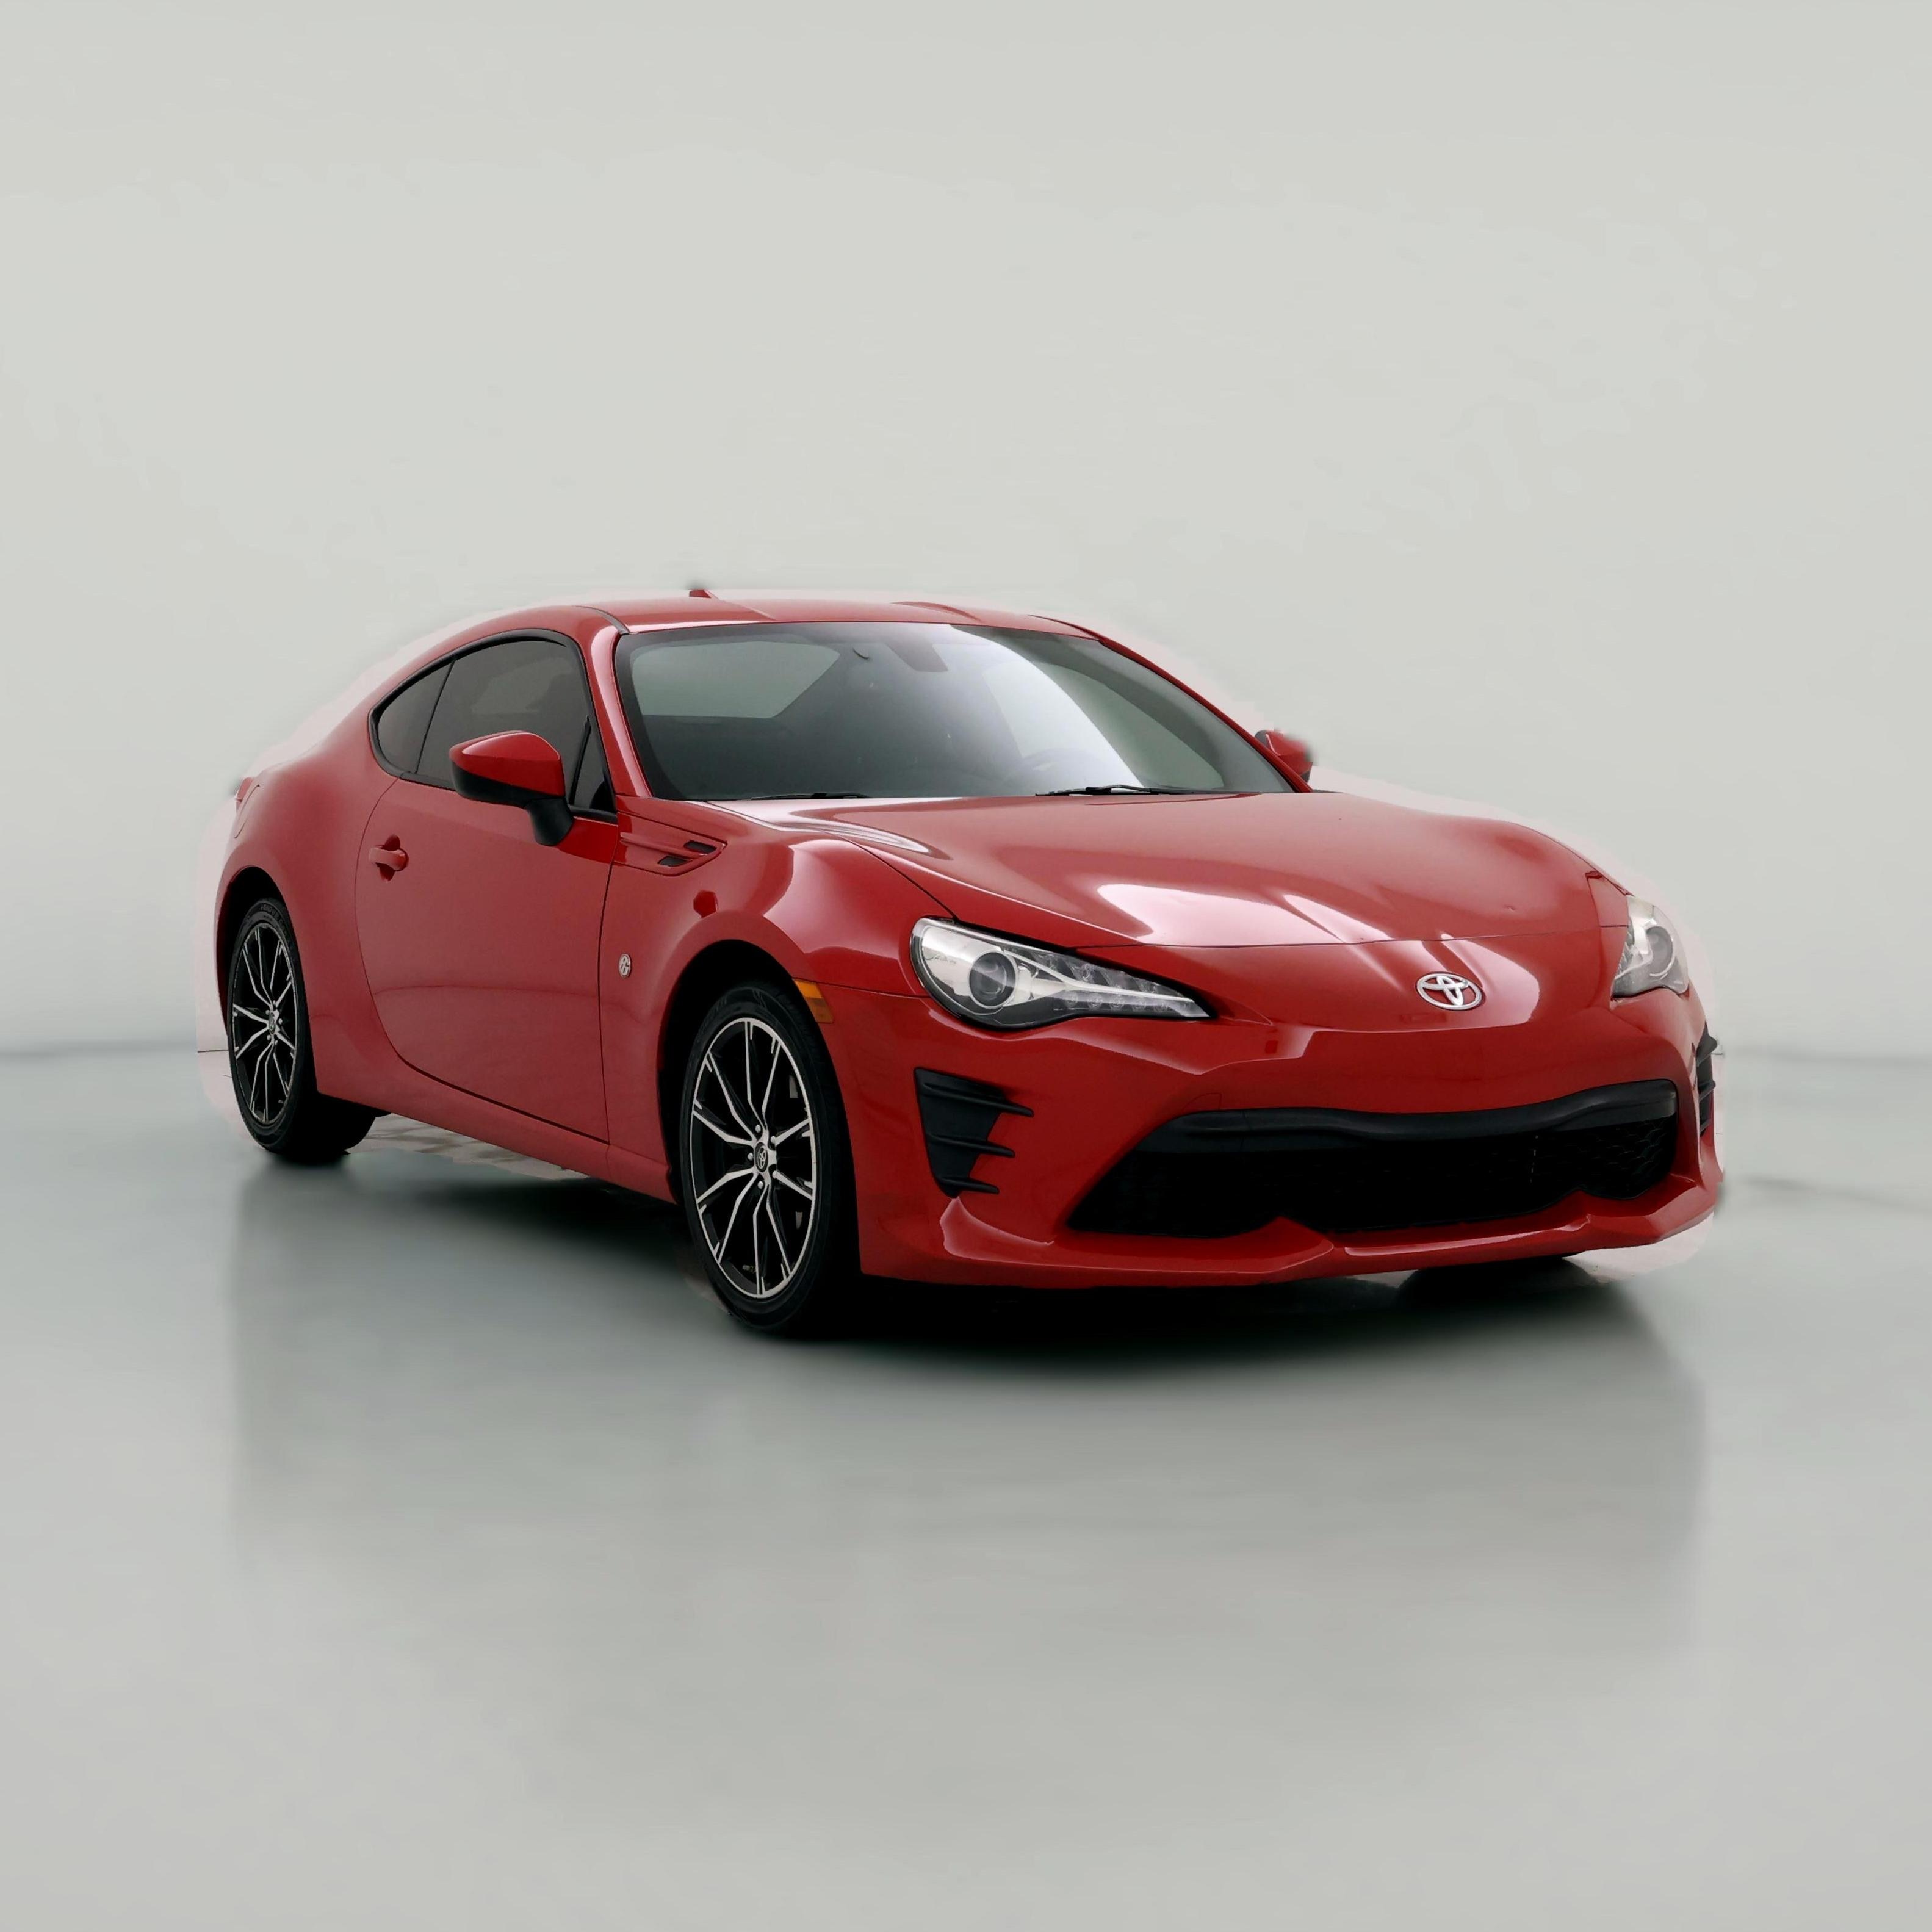 Used Toyota 86 for Sale